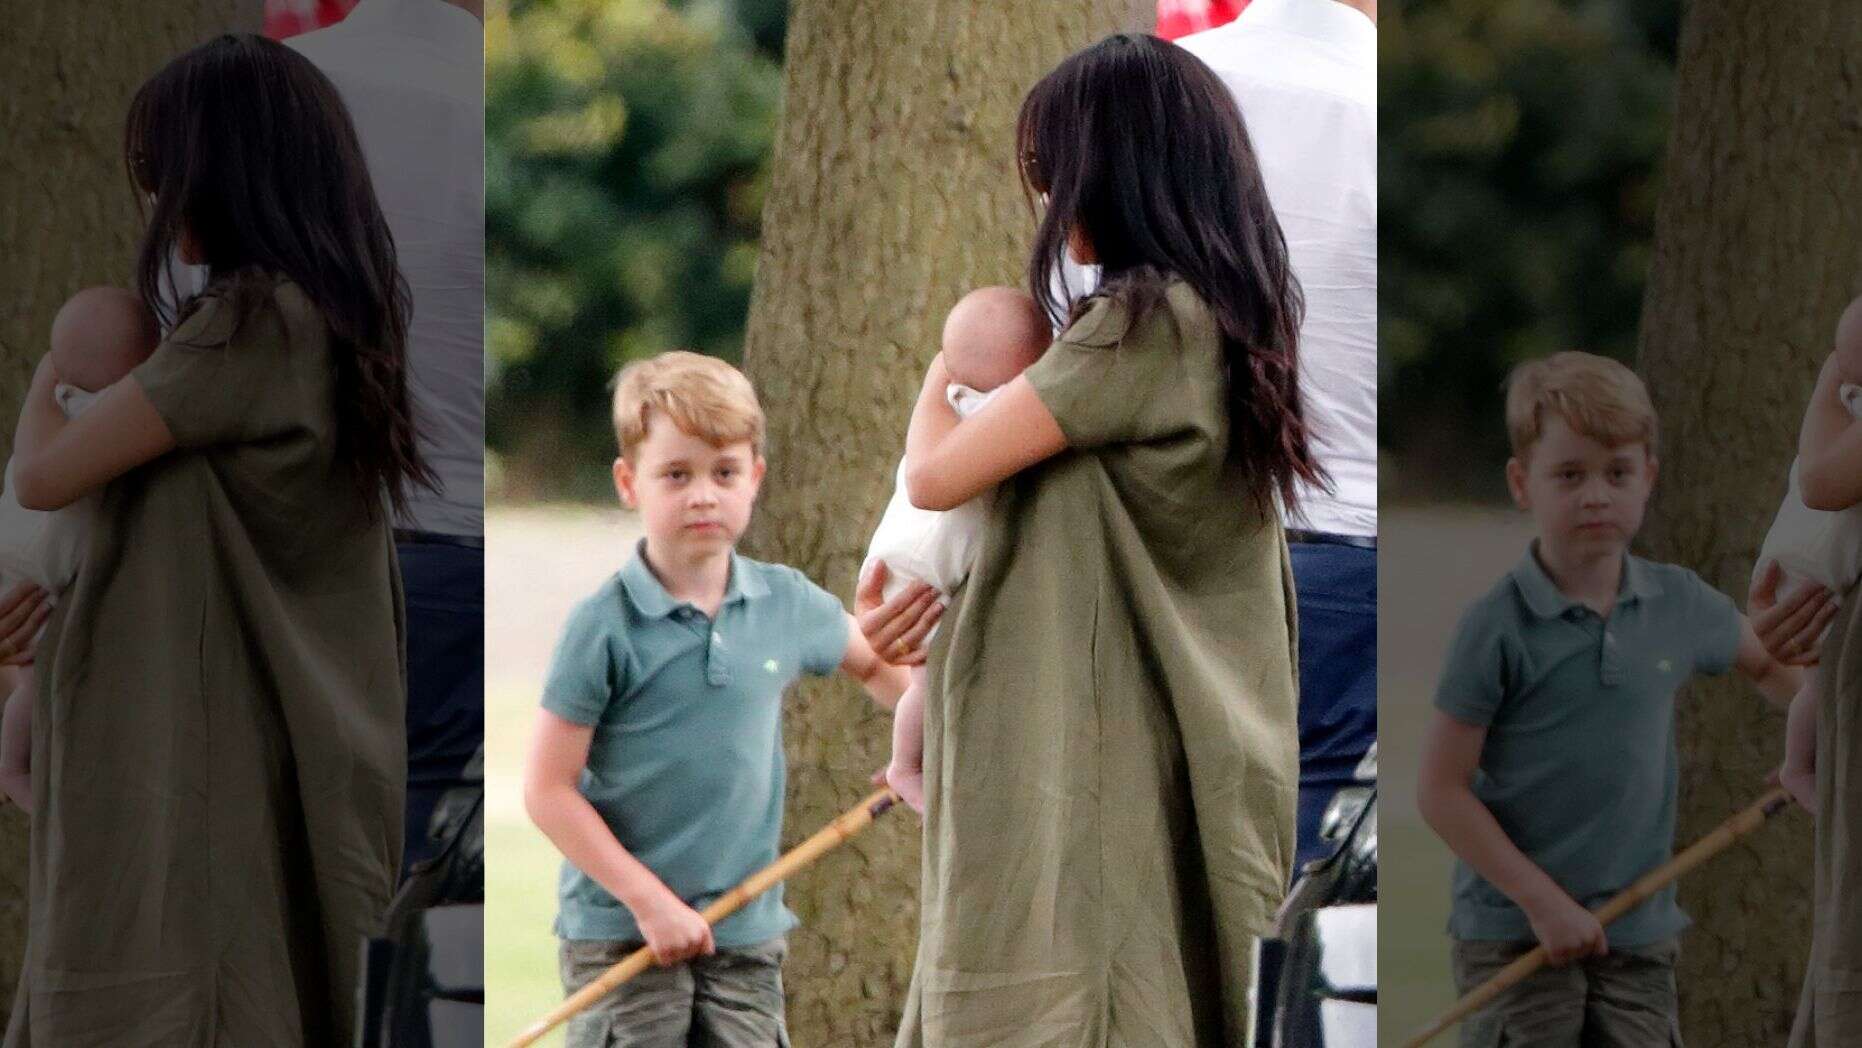 Meghan Markle shamed online for how she held son Archie at polo event